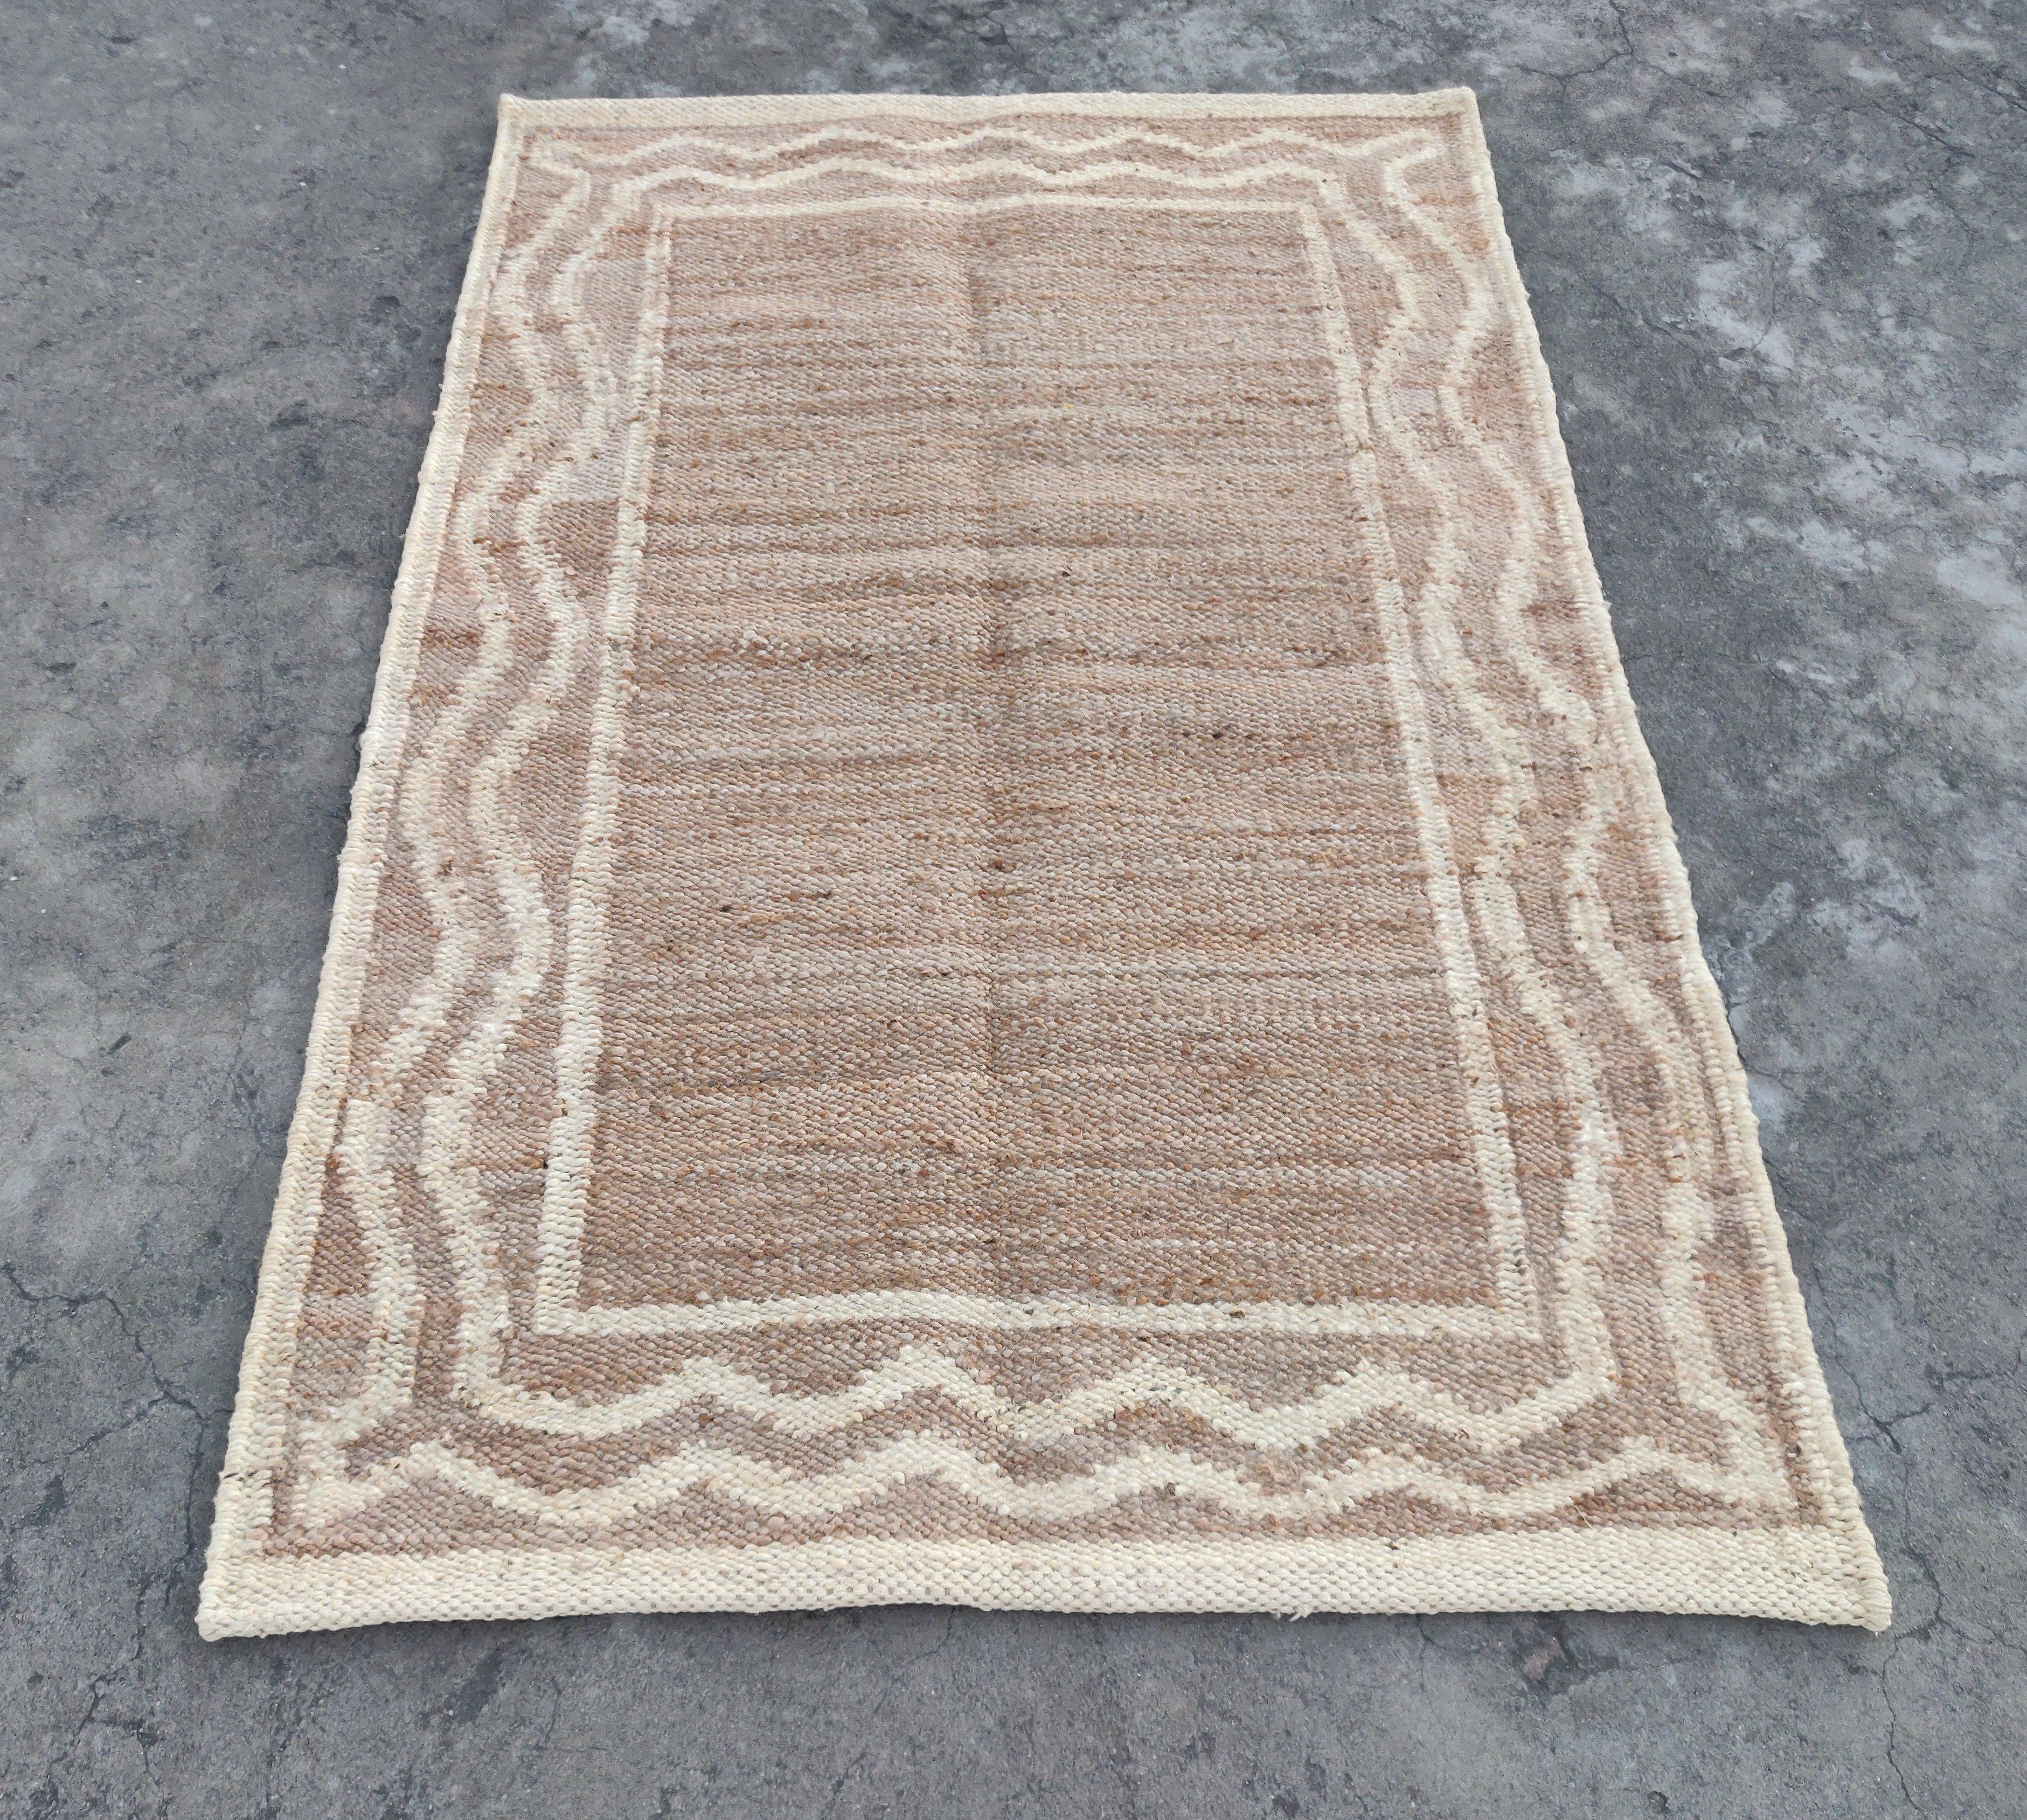 Hand-Woven Handmade Jute Area Flat Weave Rug, 4x6 Jute And White Bordered Indian Dhurrie For Sale